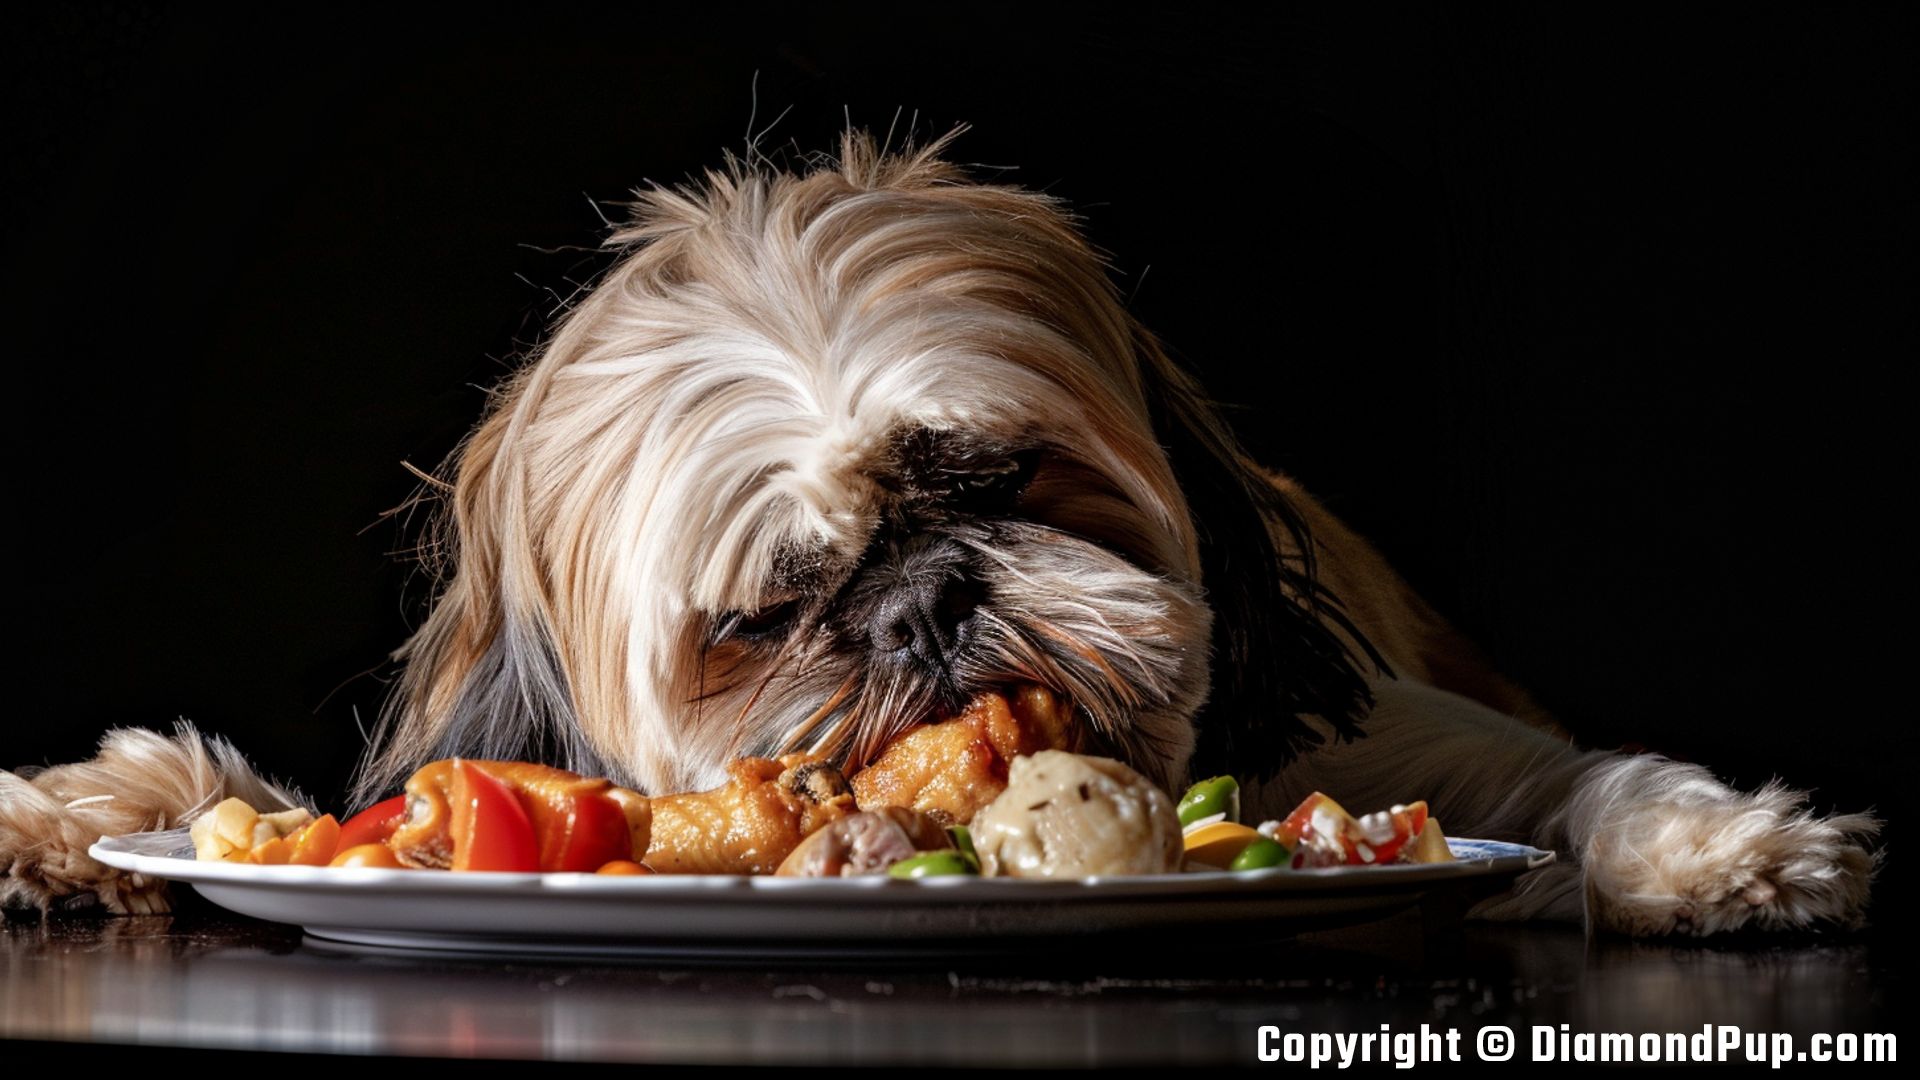 Image of an Adorable Shih Tzu Eating Chicken